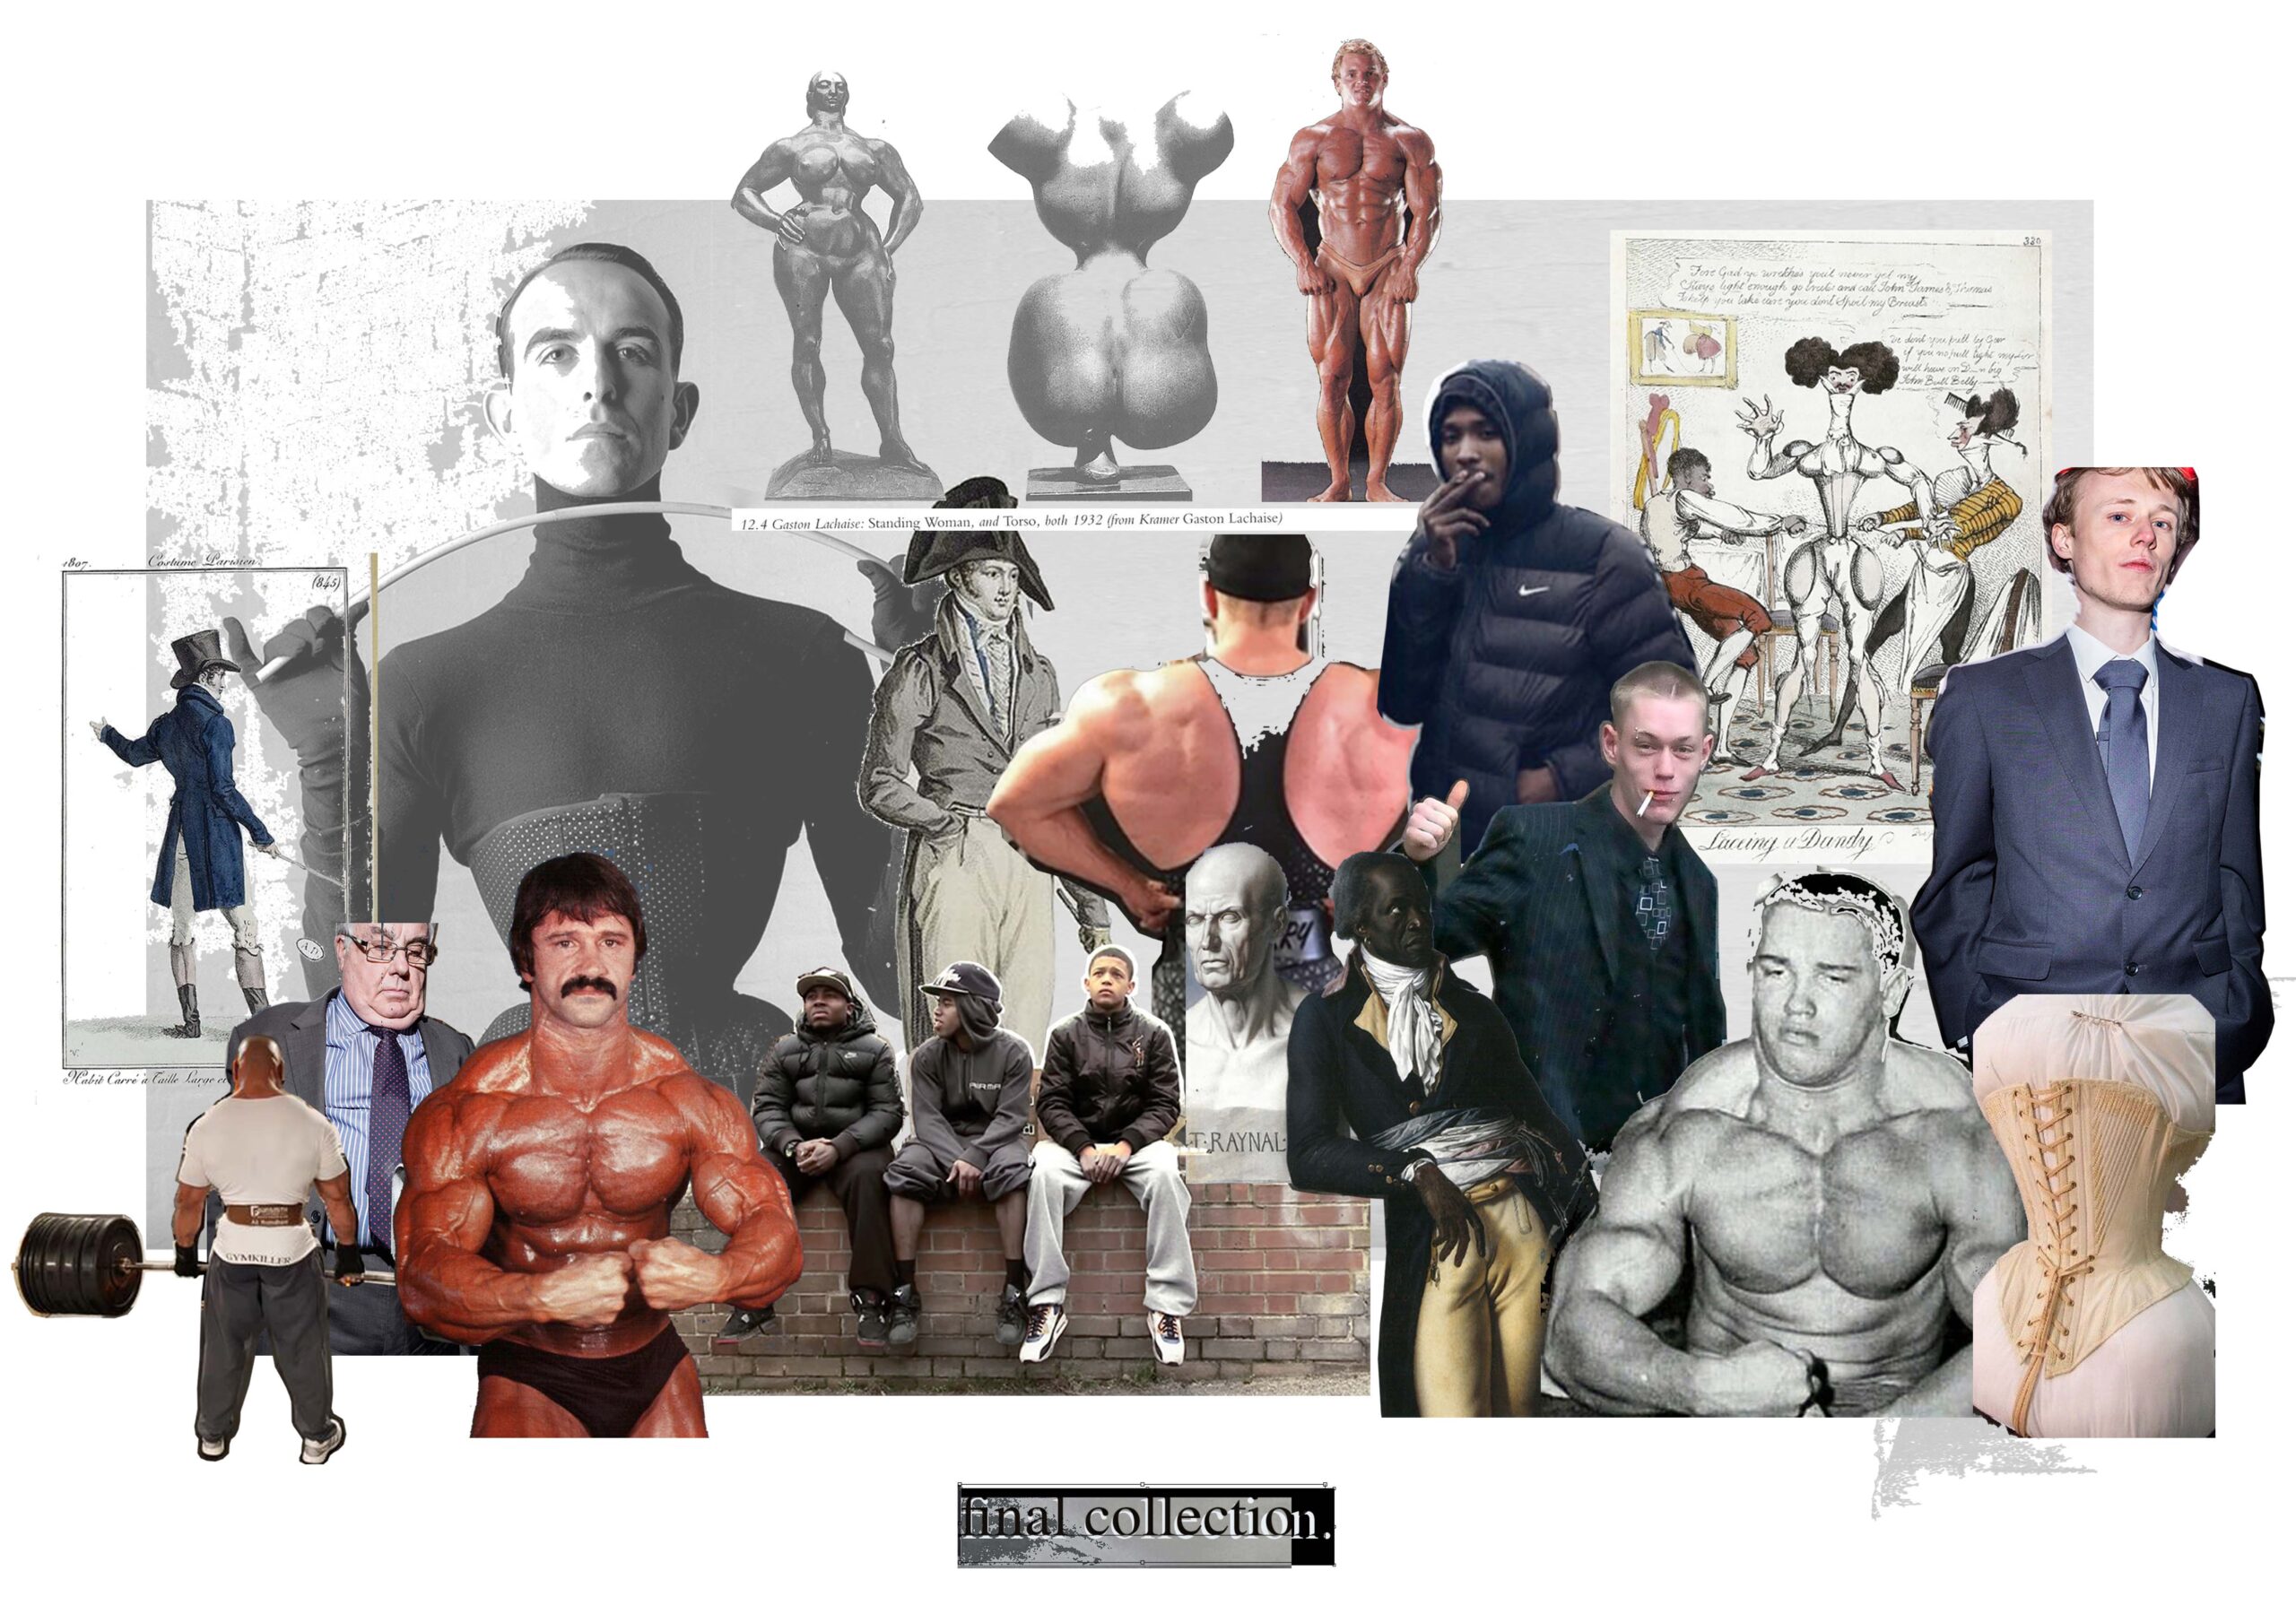 Joe Pearson presents Five Archetypal Men in One Collection